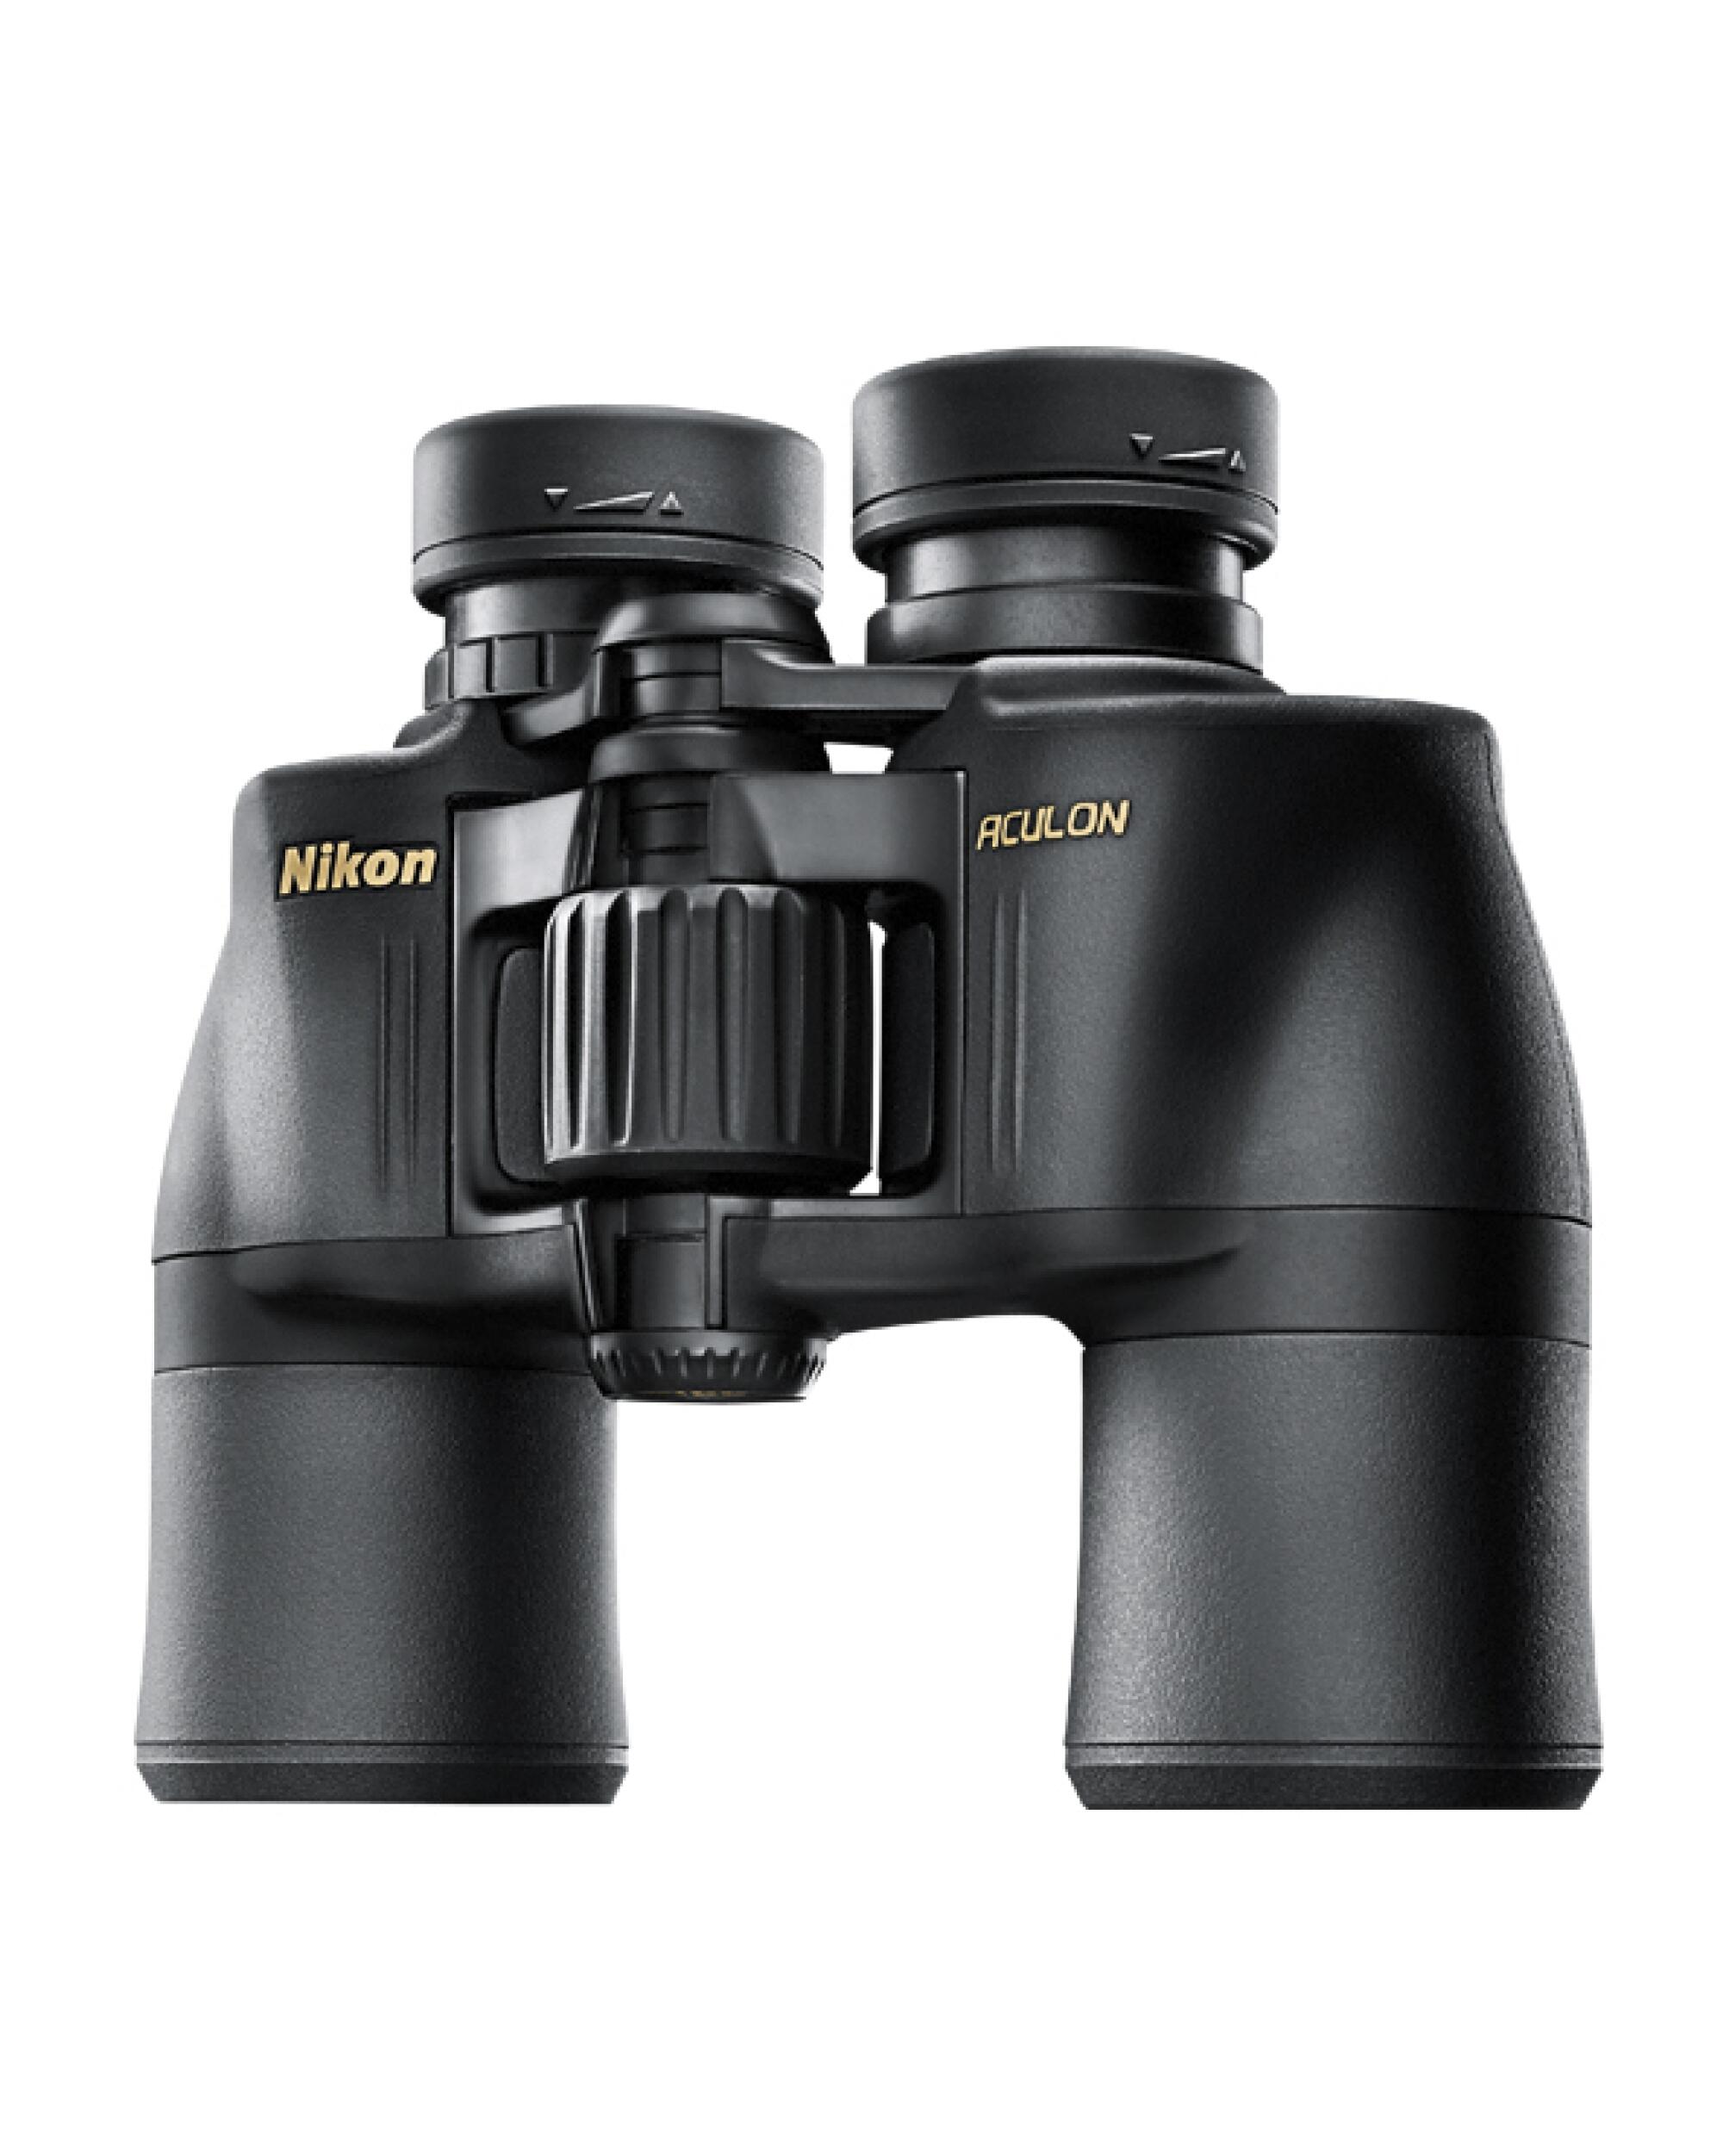 Birdwatching Binoculars for the hiking guide for the LA Times Gift Guide 2022.